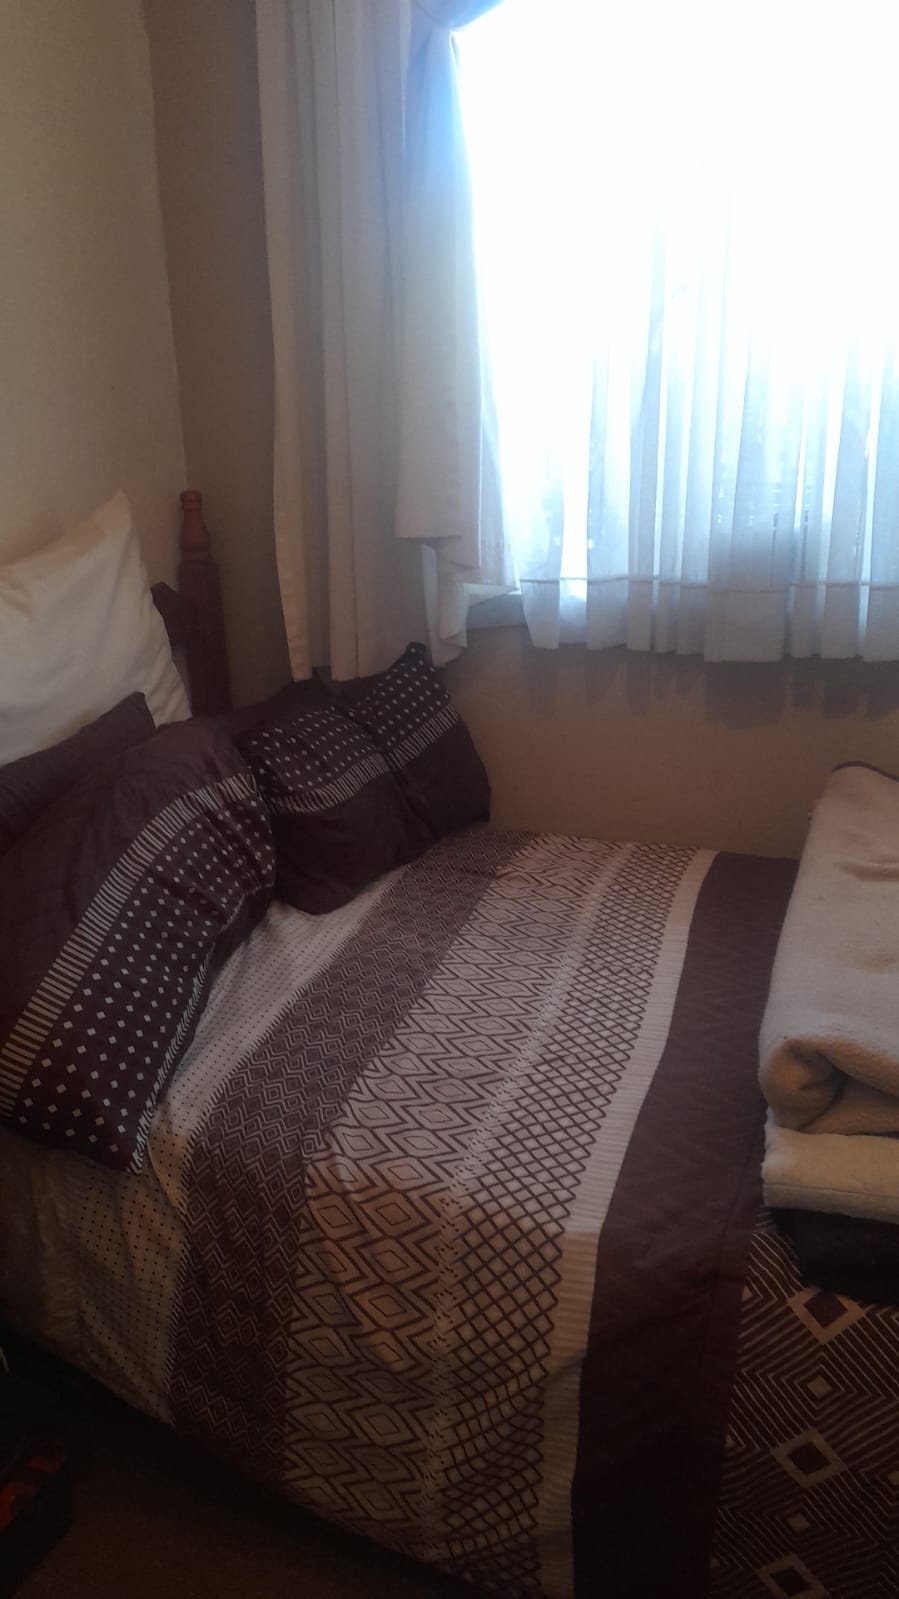 Room for rent in Horizon Park Gauteng. Listed by PropertyCentral